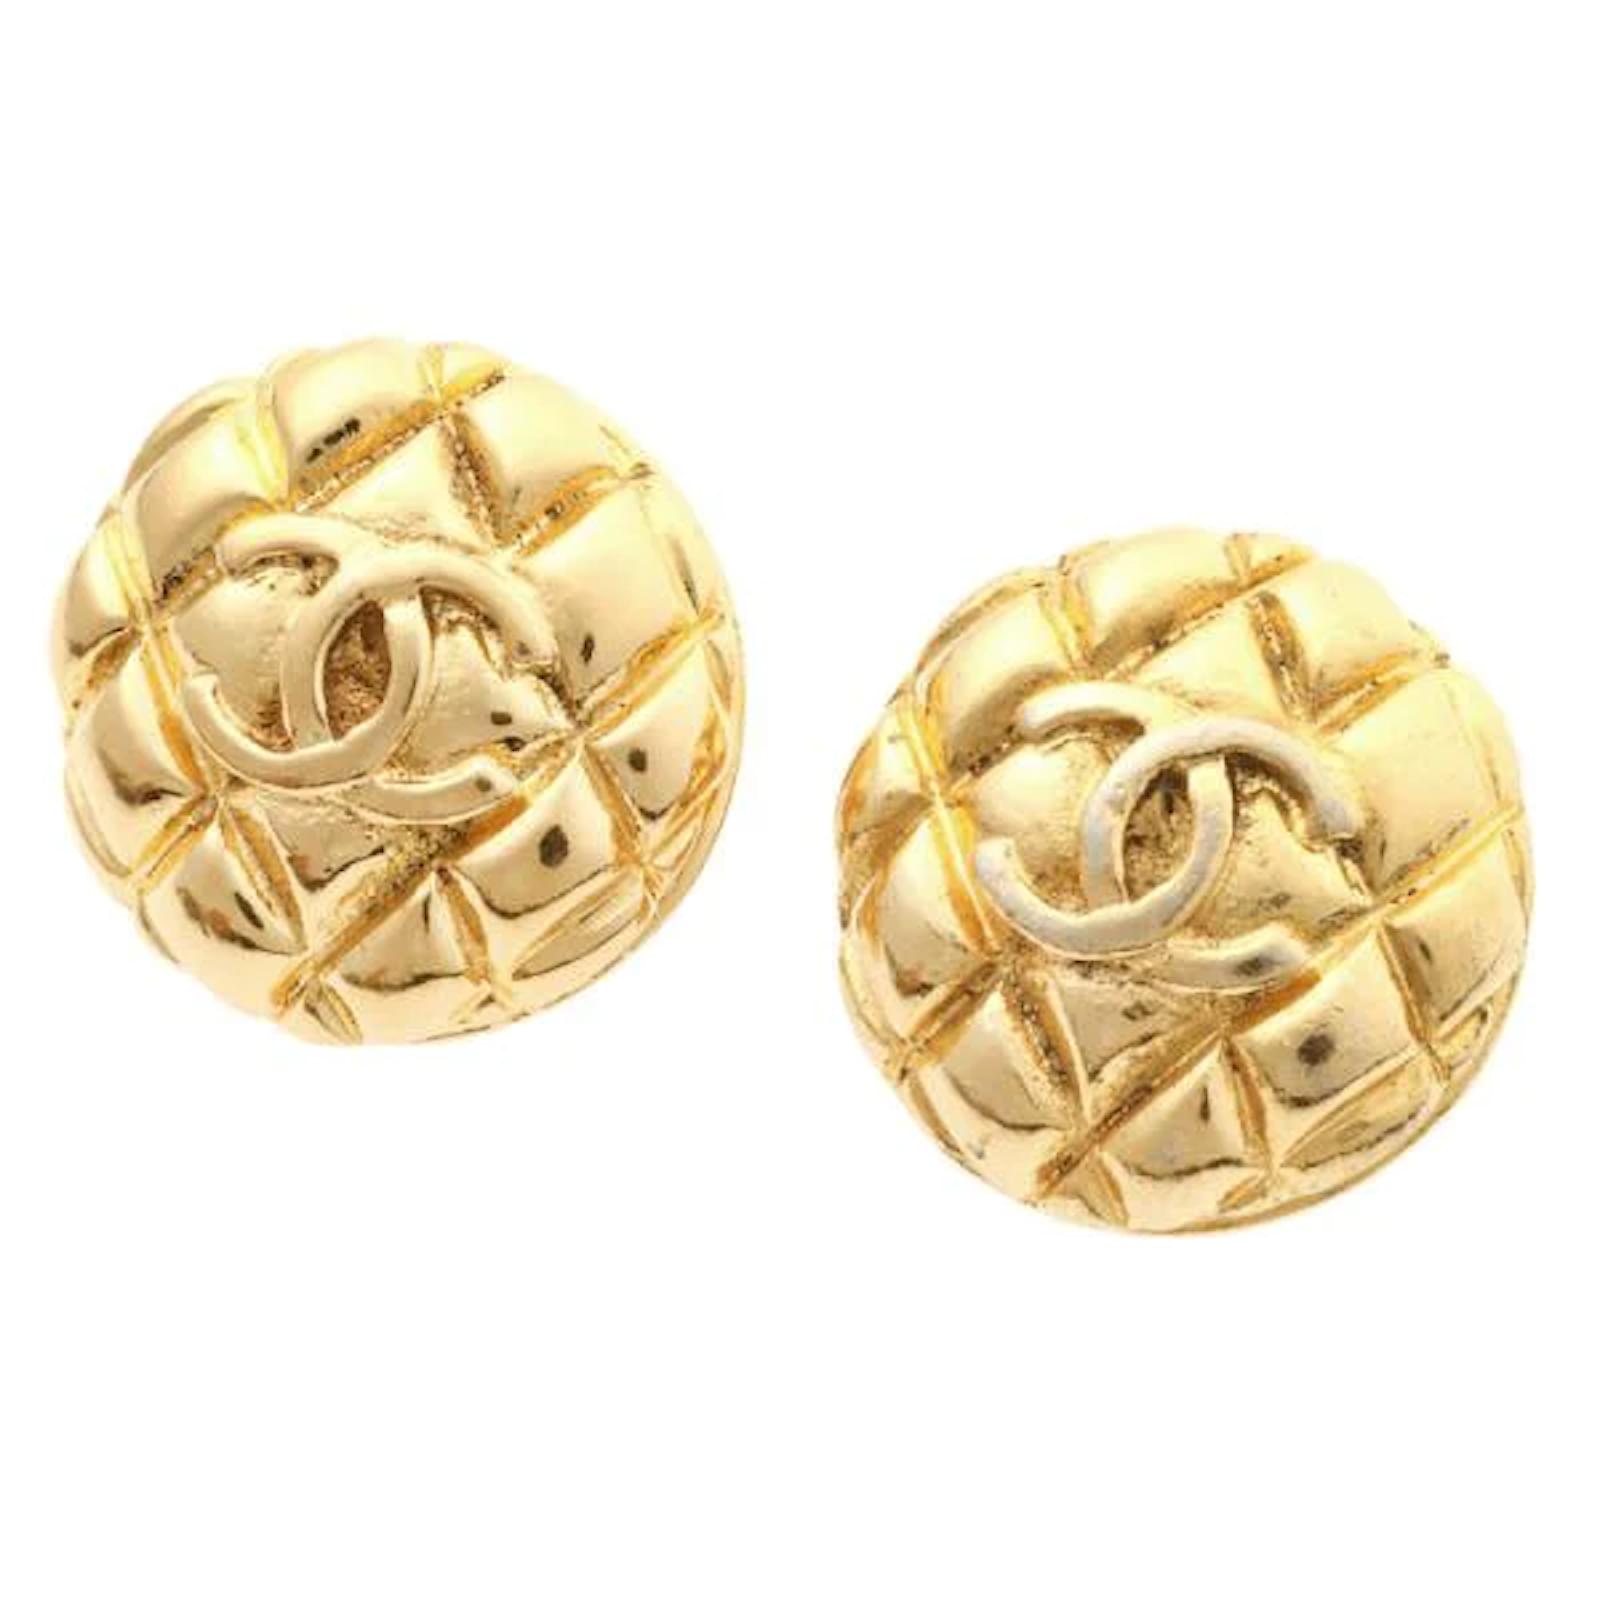 Chanel Diamond Quilted Gold Clip-On Earrings - 2 Pieces